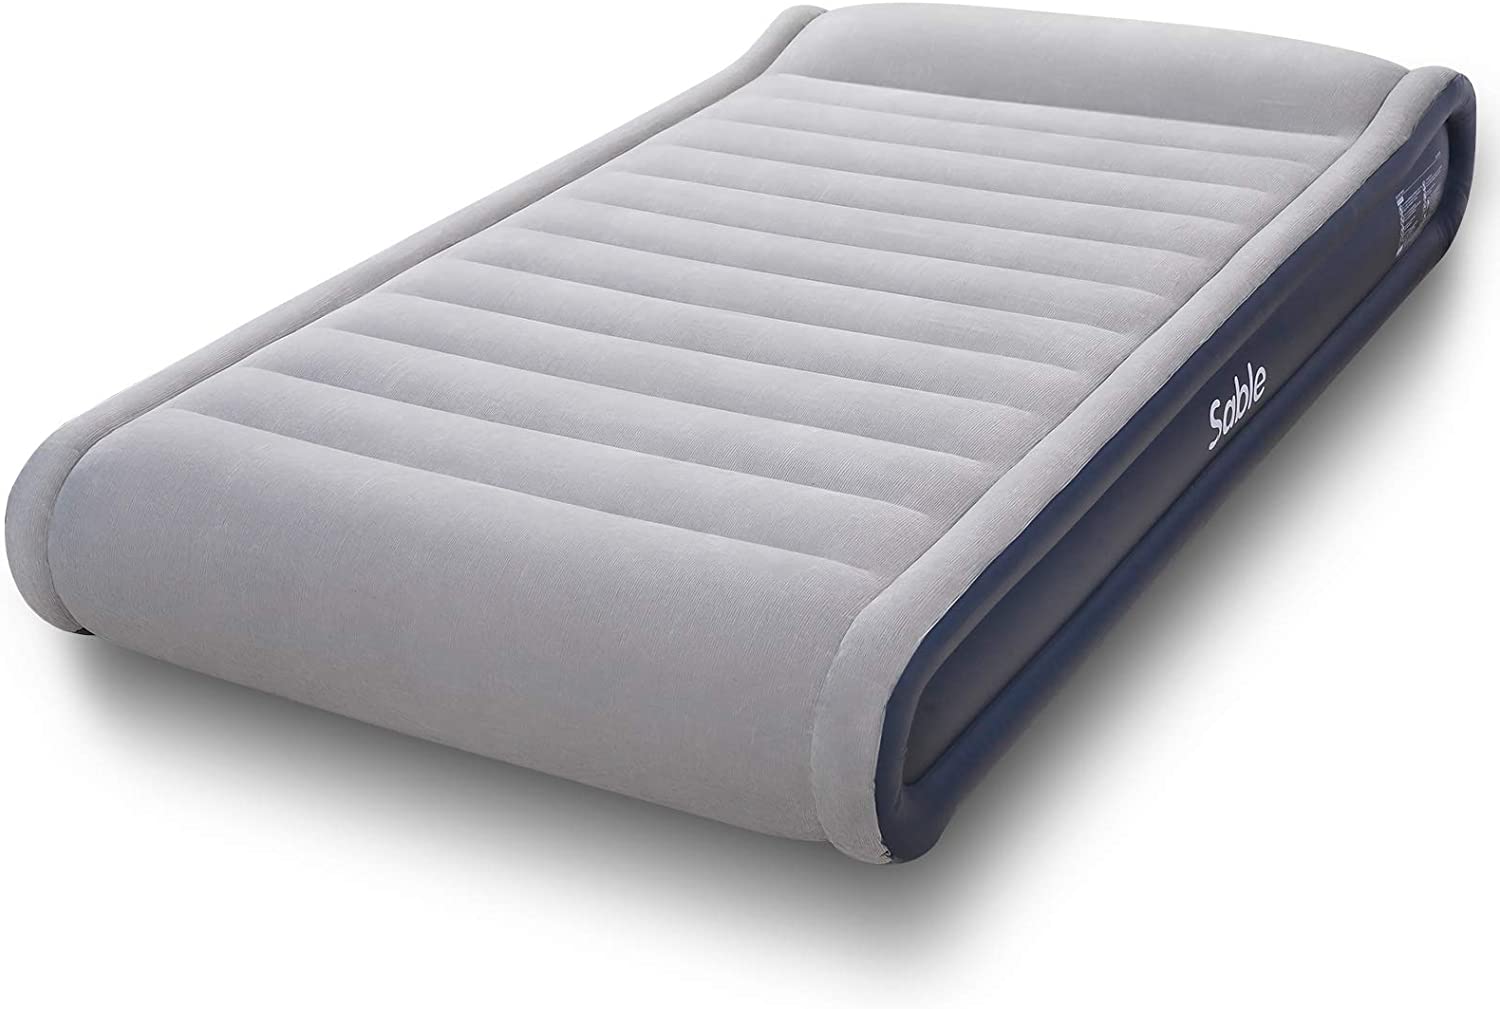 An air bed like this full size XL is slightly narrower than a queen size, but is longer to accommodate people that are taller.